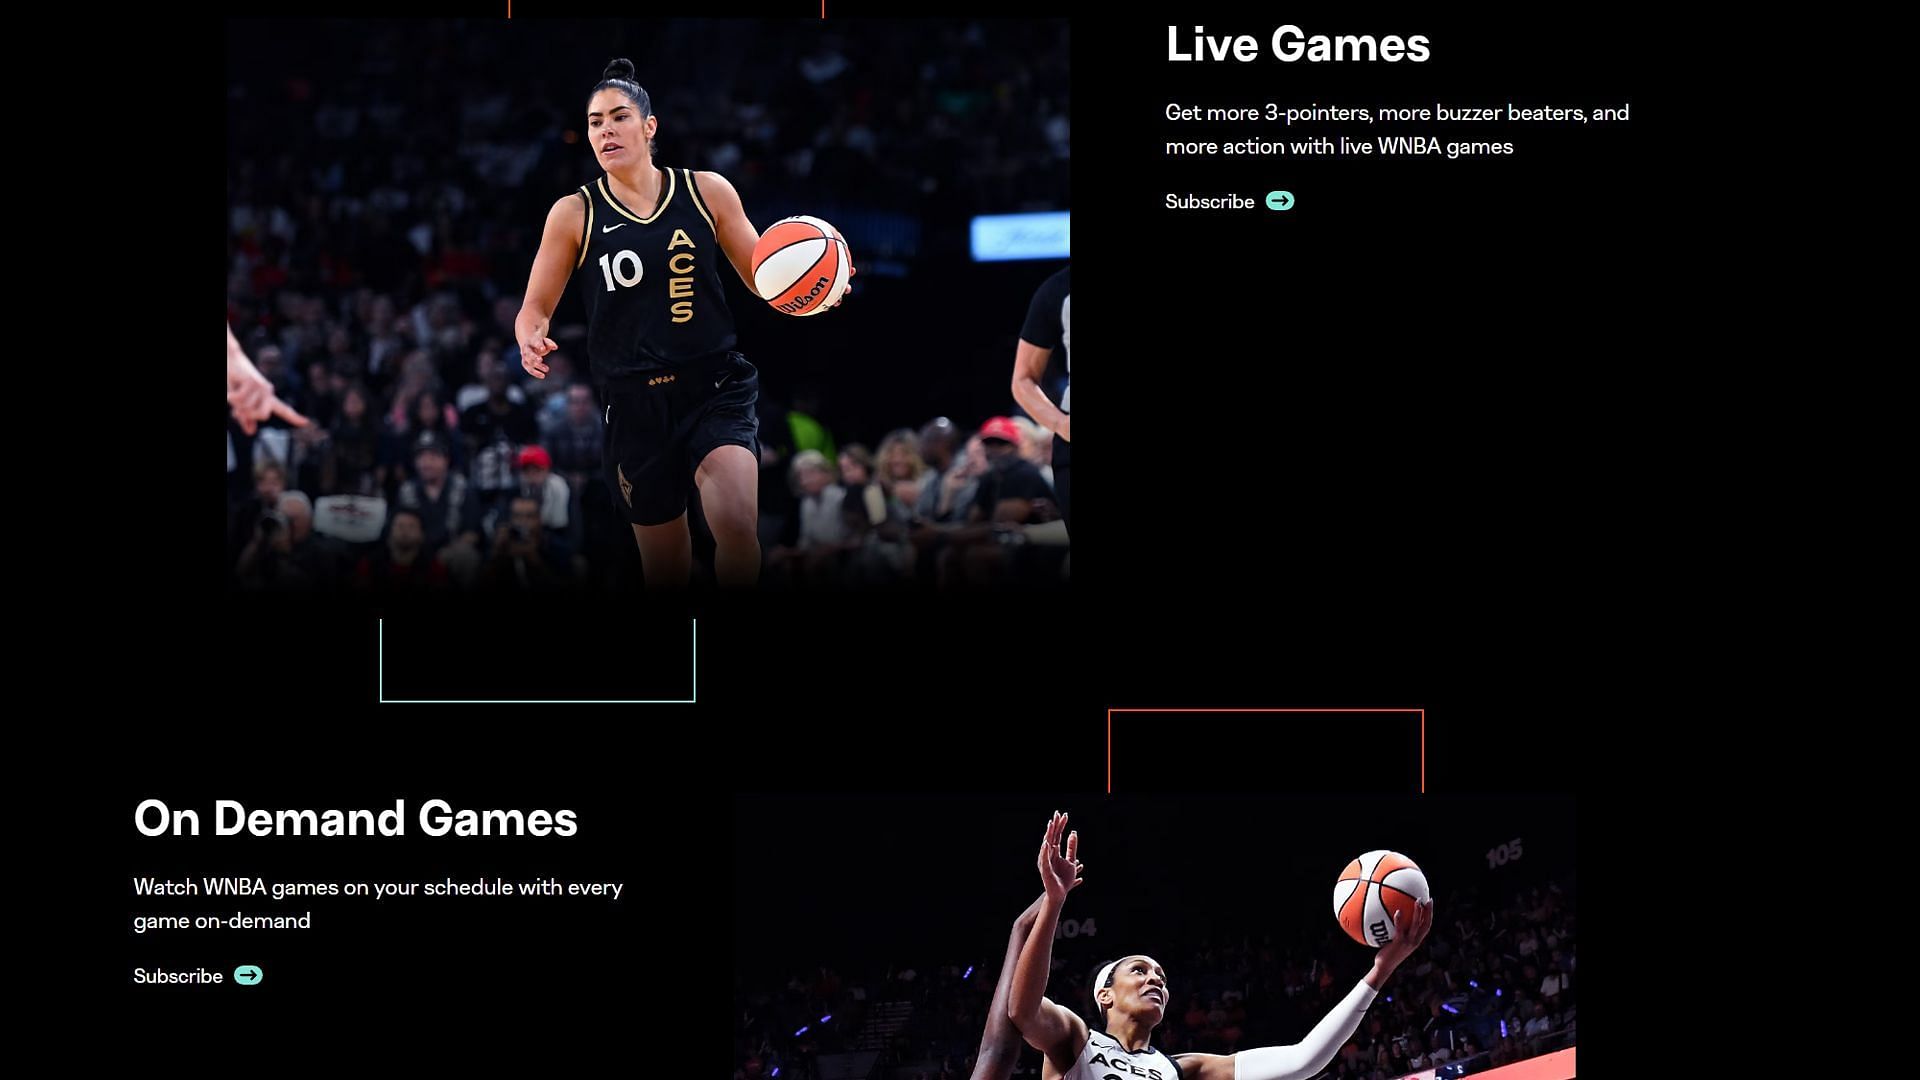 The League Pass offers both live and on-demand games